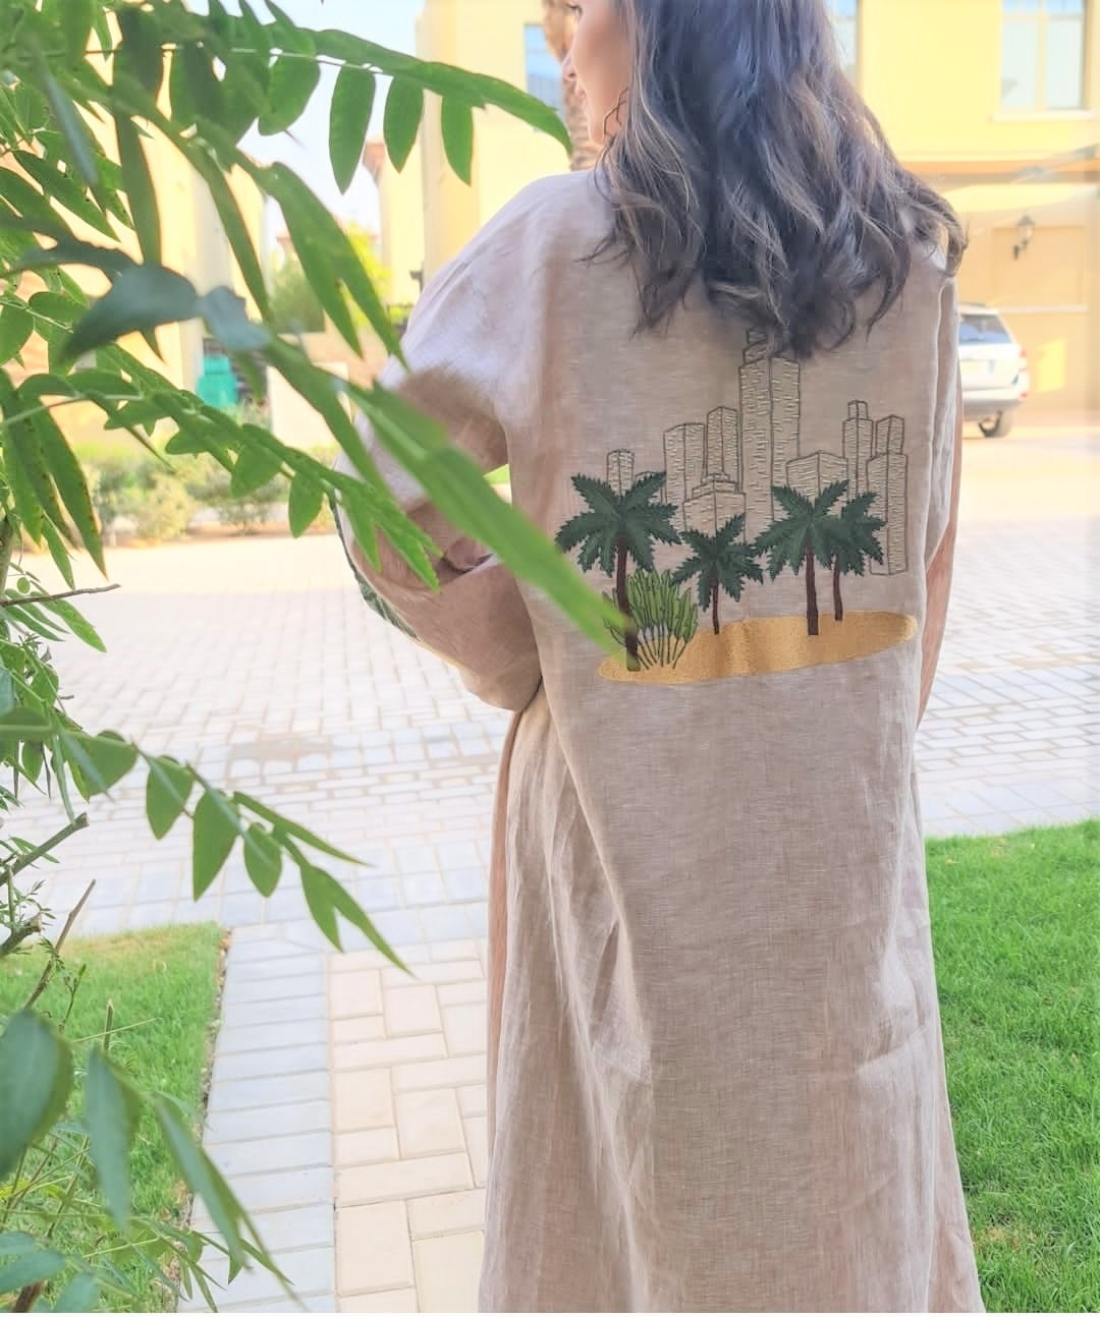 Embroidered Palm Trees and High Rise Buildings Handmade Beige Linen Abaya 